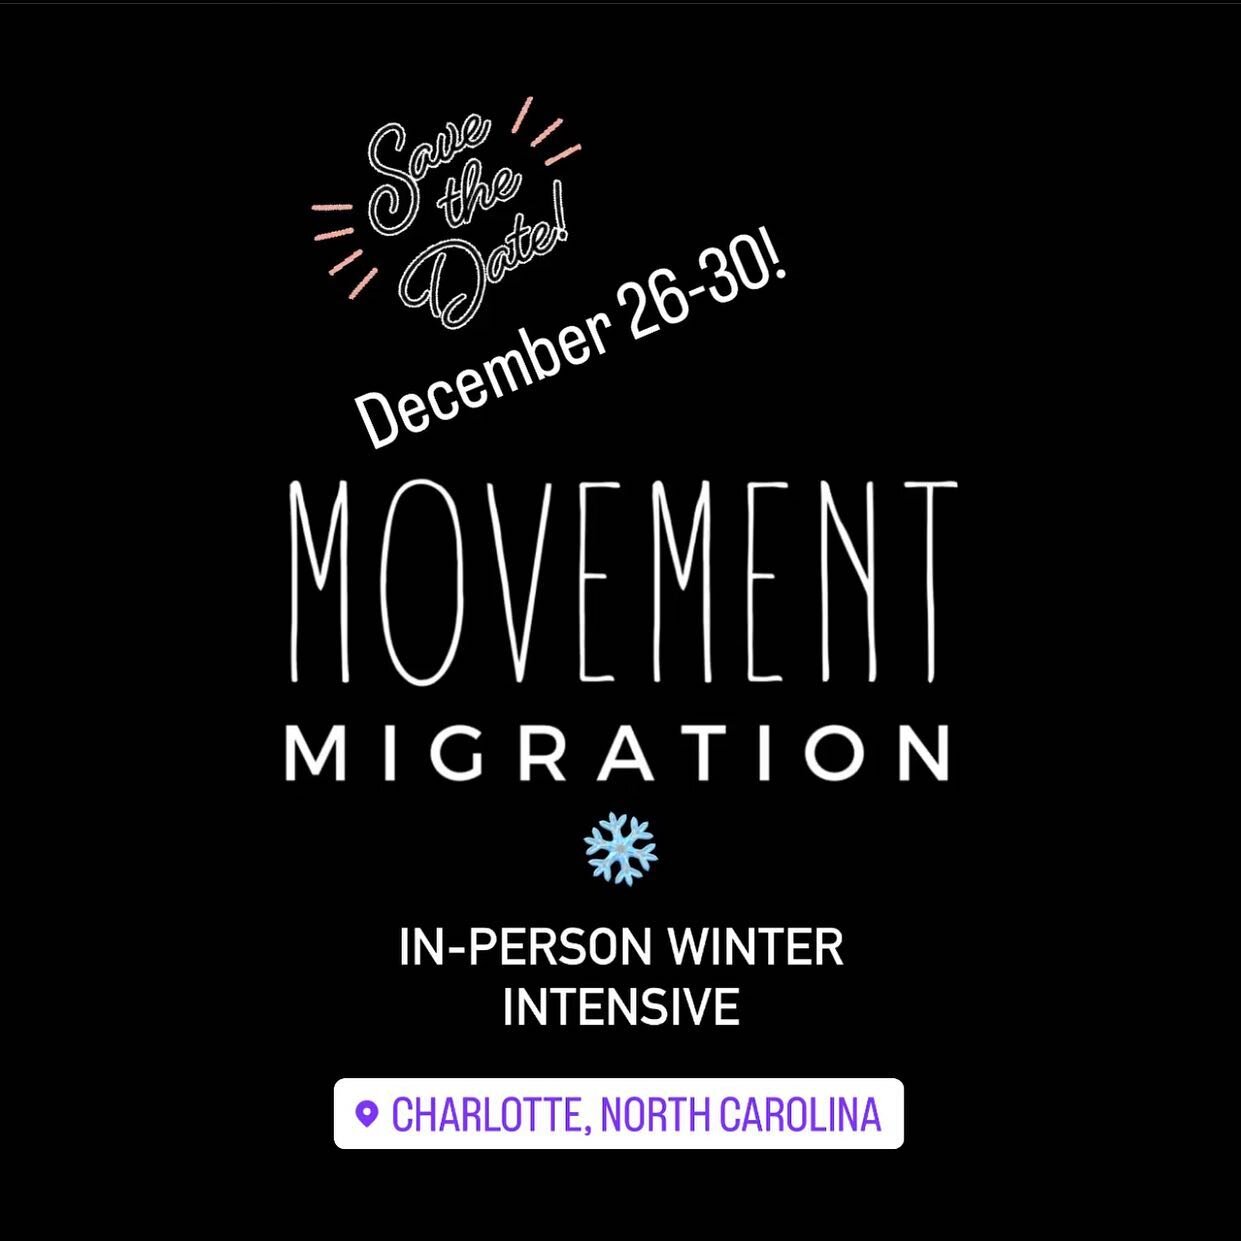 📣Save the Date
🗓December 26-30, 2022
.
Movement Migration&rsquo;s in-person Winter Intensive will take place in Charlotte, NC
.
More information coming soon!
We will have an on-line option too!